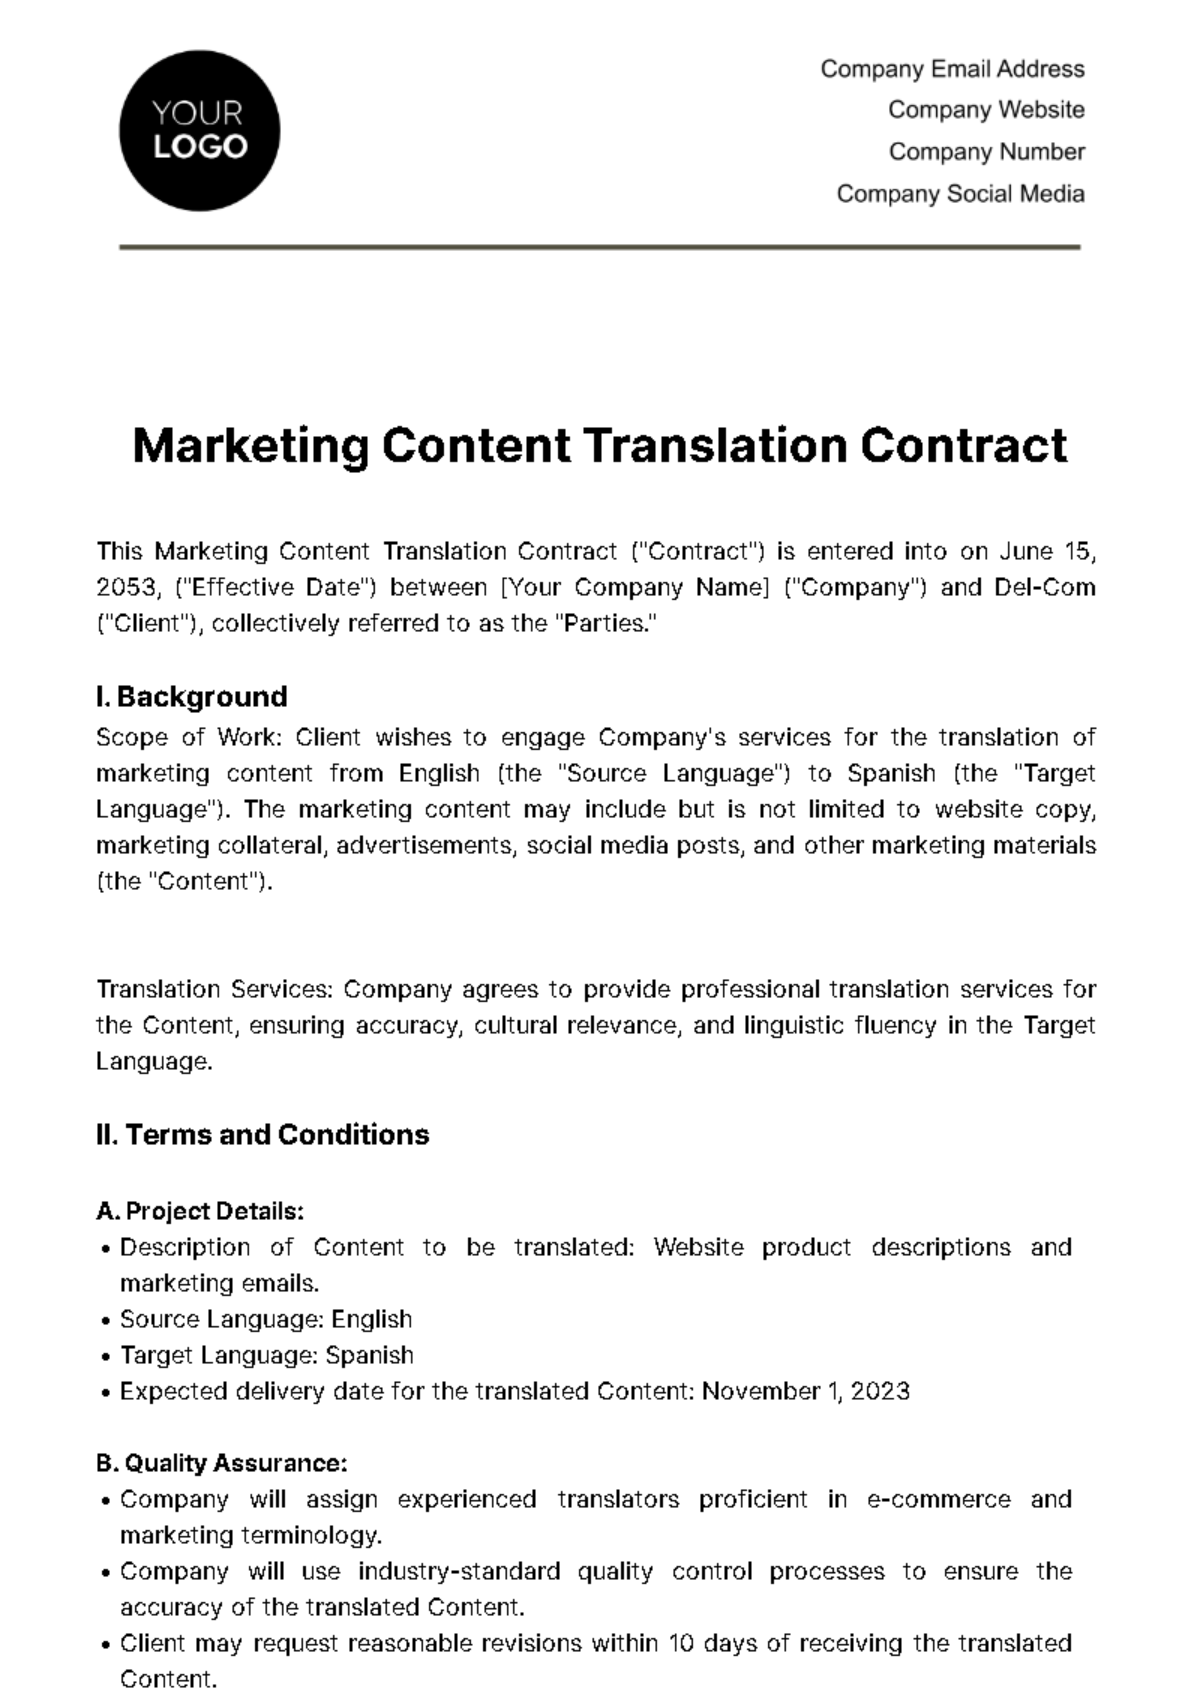 Marketing Content Translation Contract Template